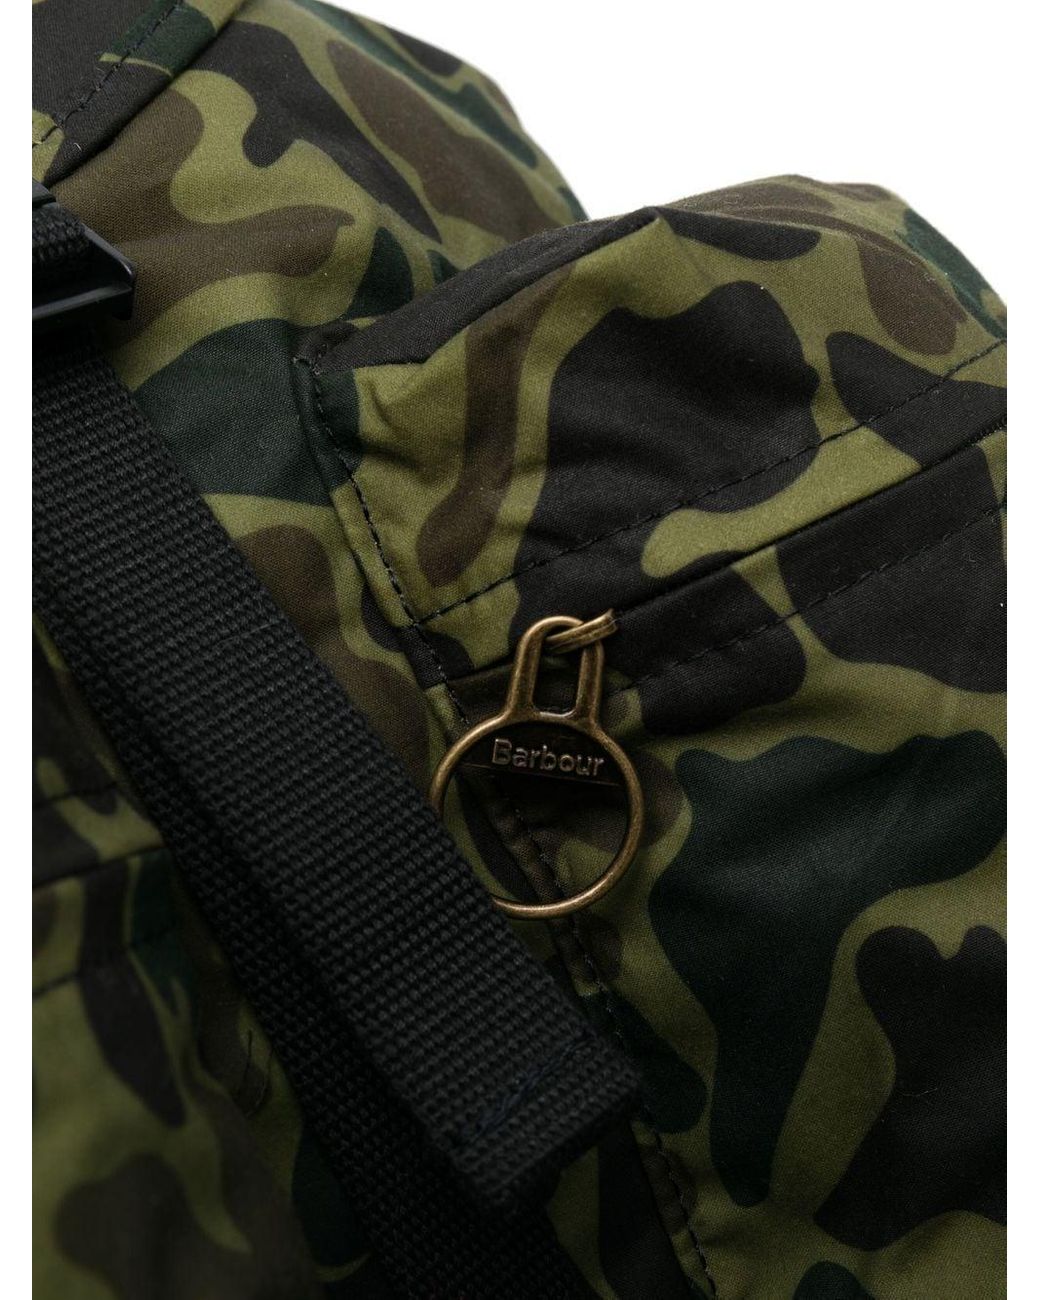 Noah × BARBOUR Backpack バックパック camo